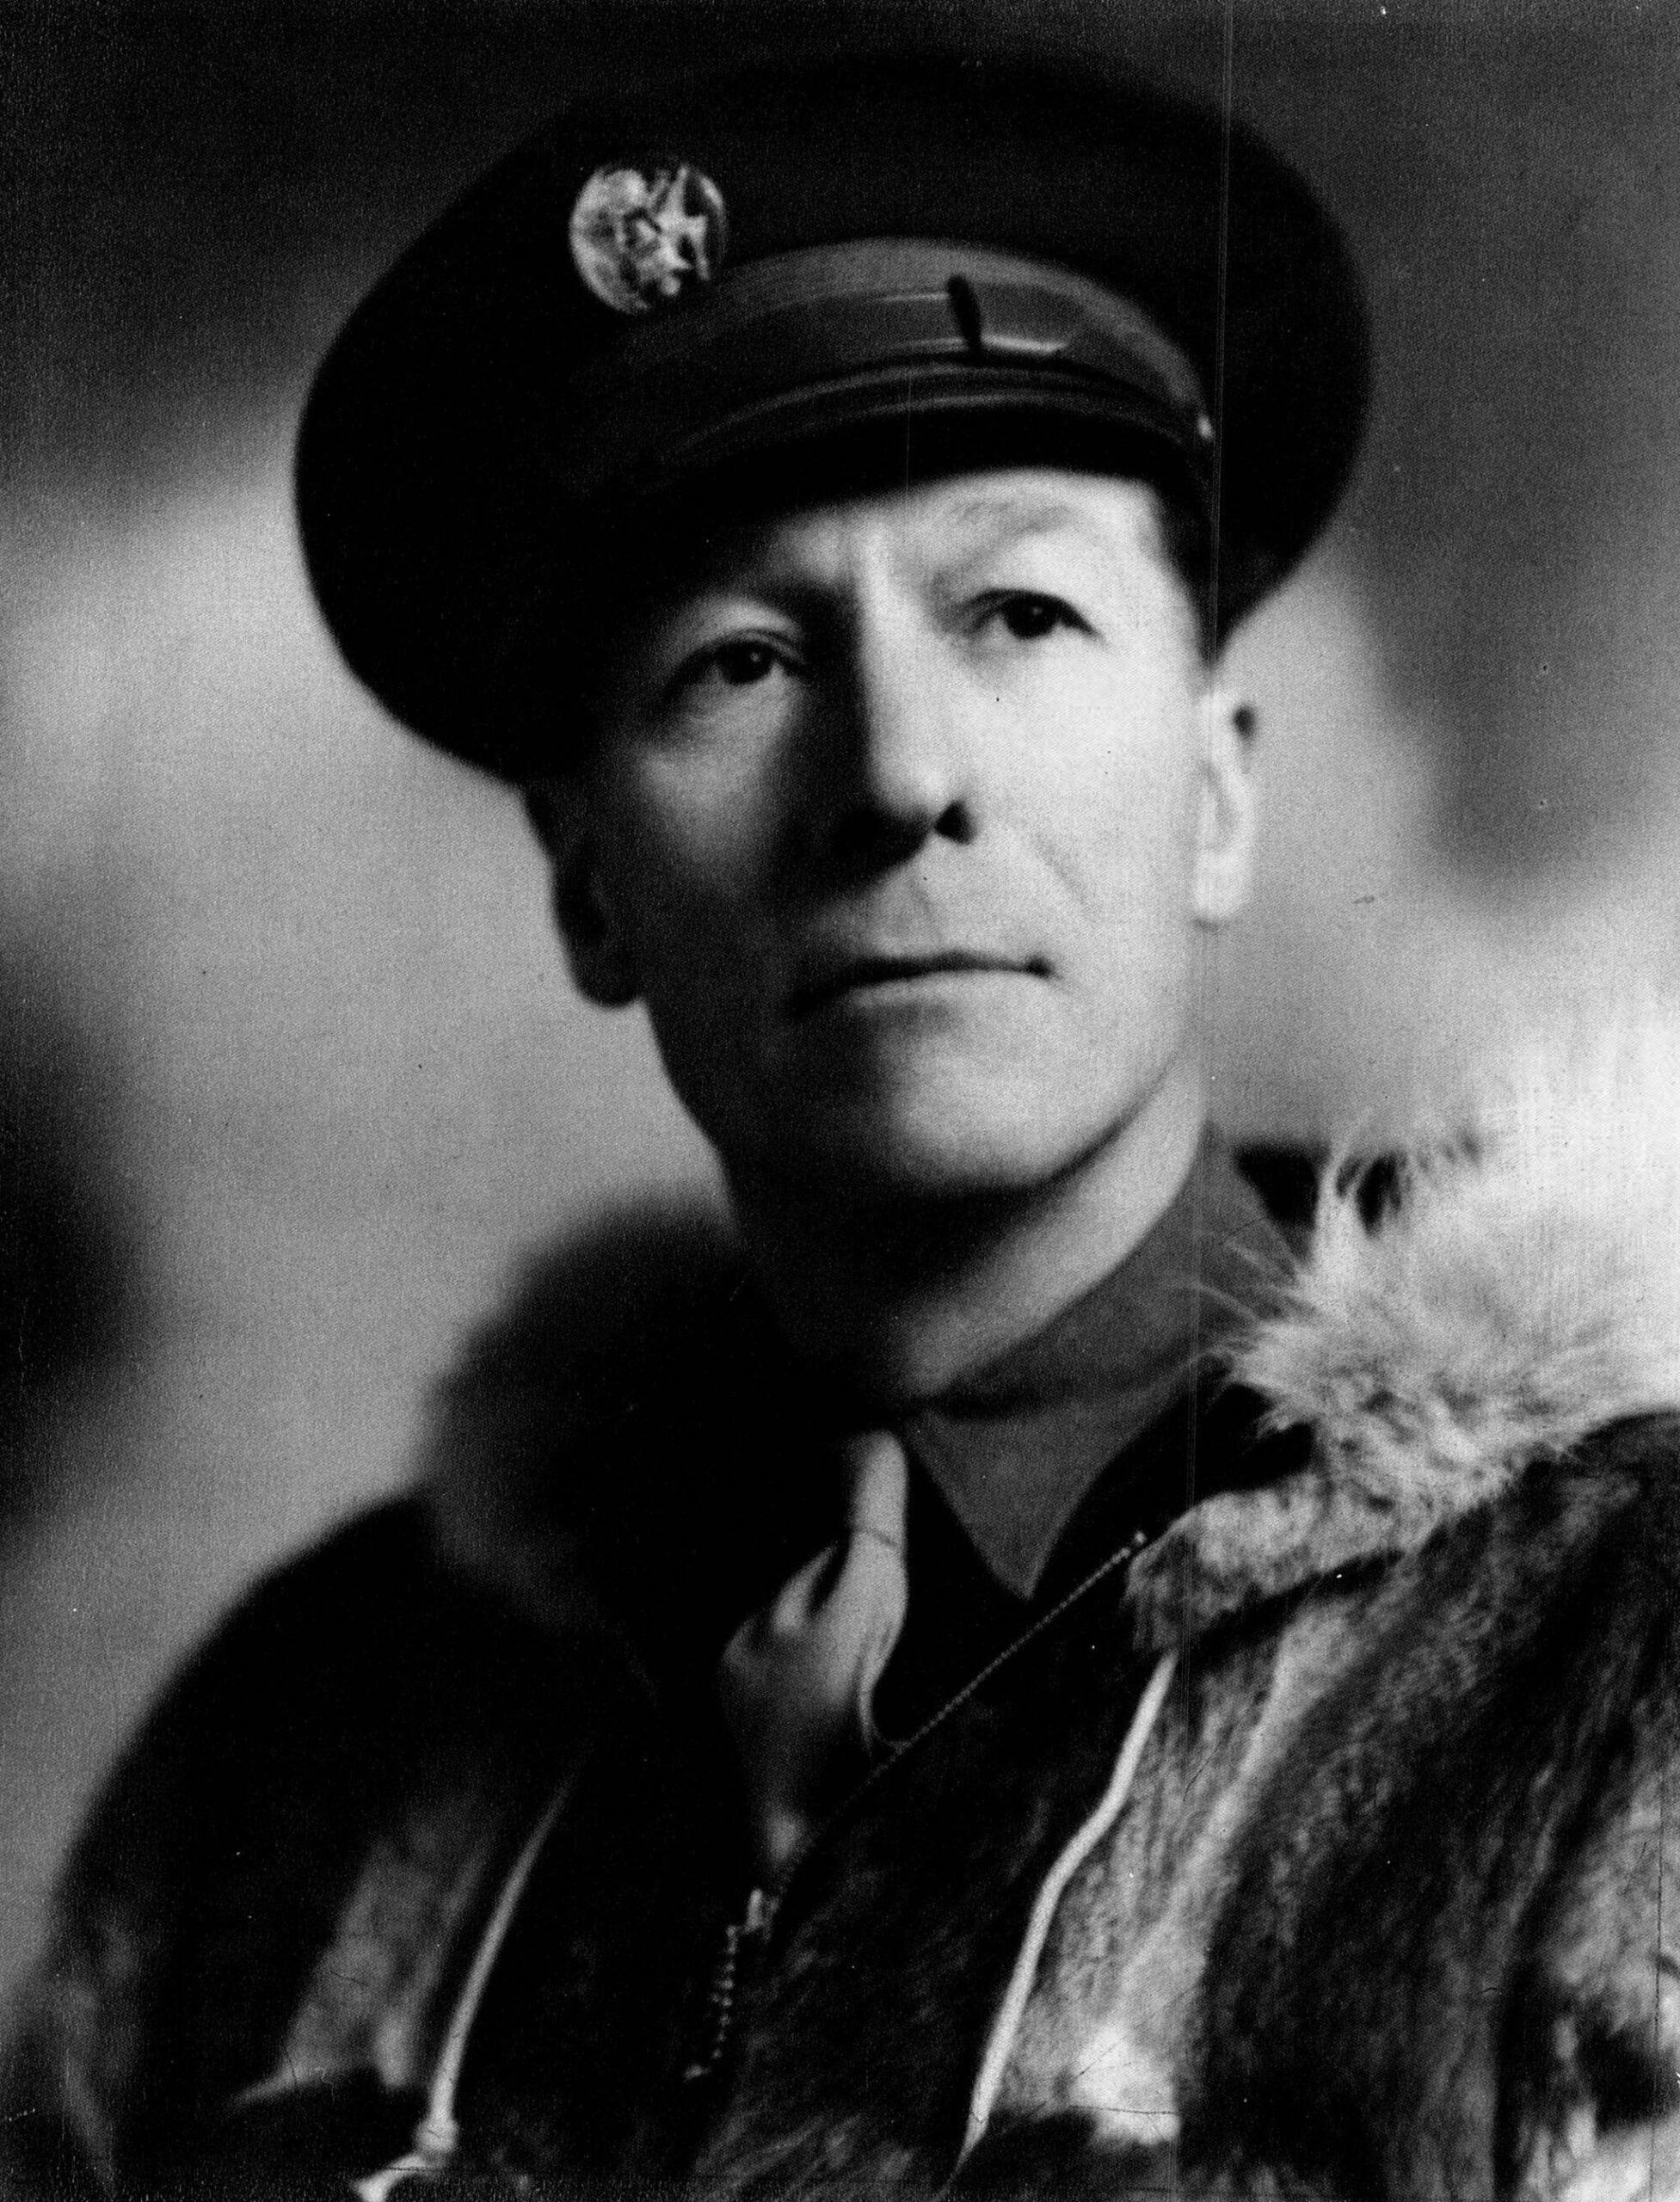 Photo courtesy of the Brennan Family Collection
This formal military portrait of John Floyd King—the man Alaskans would know as Alec Hardin MacDonald—was taken during his service in World War I.